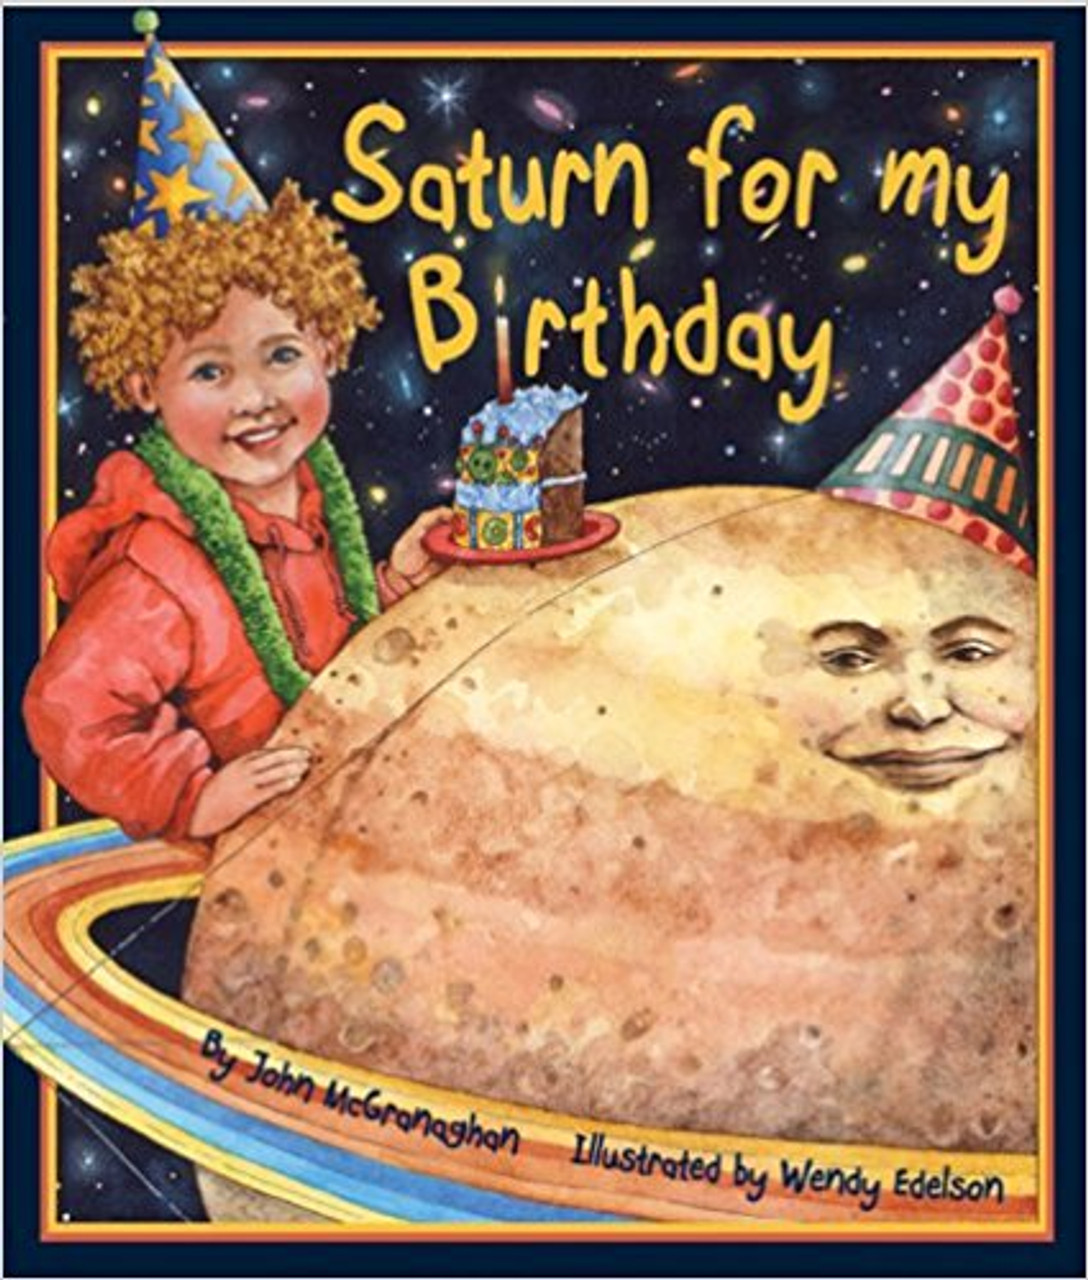 Saturn For My Birthday by John McGranaghan